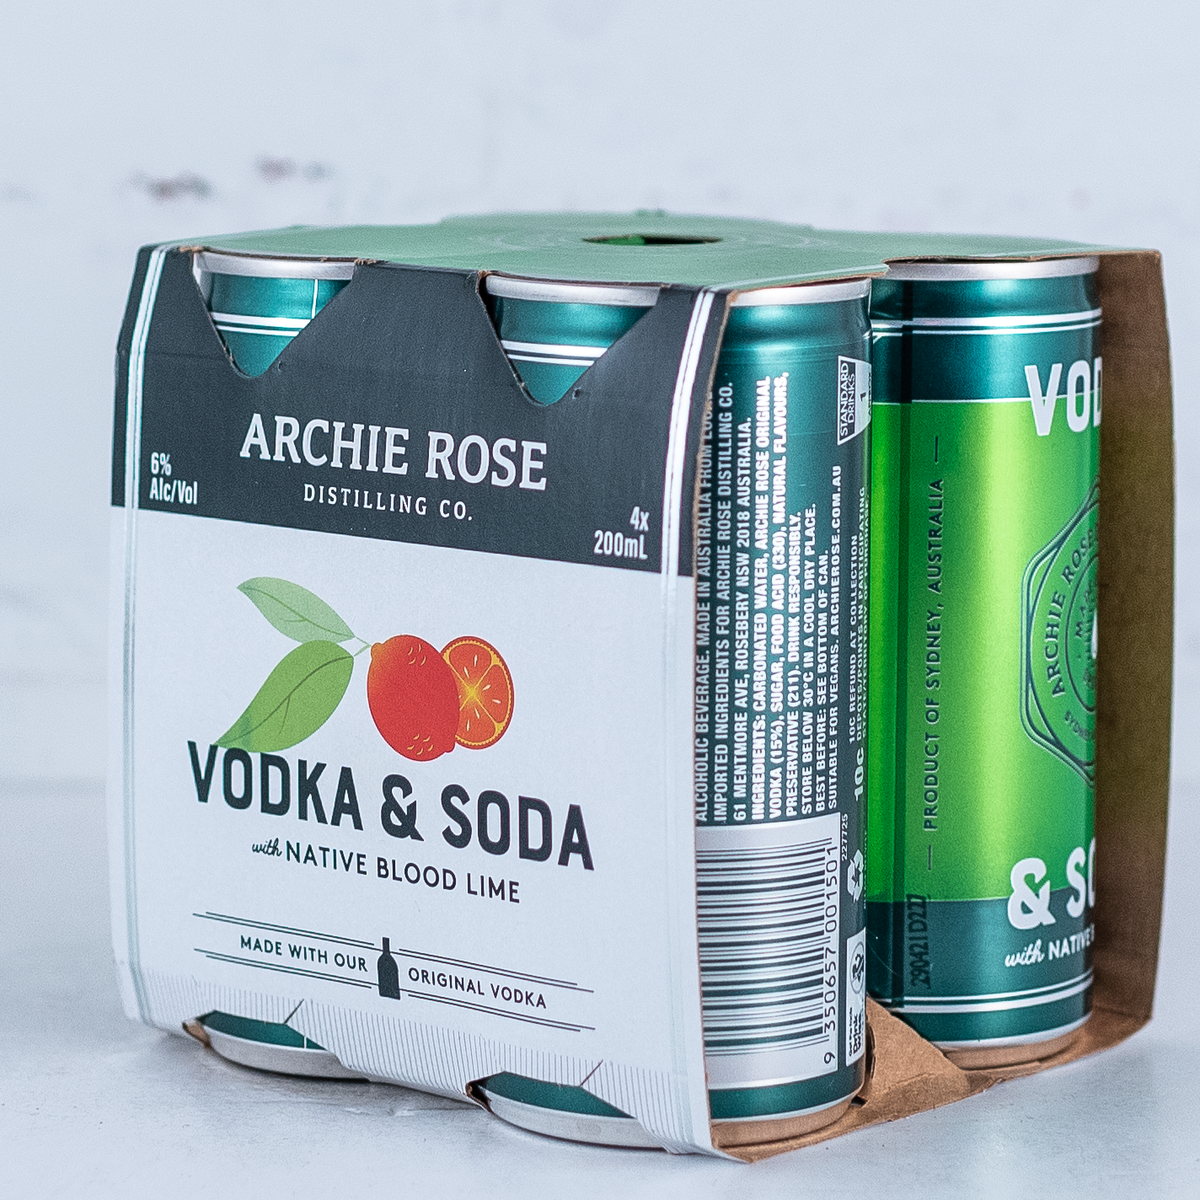 Archie Rose Vodka & Soda with Blood Lime From$8.00